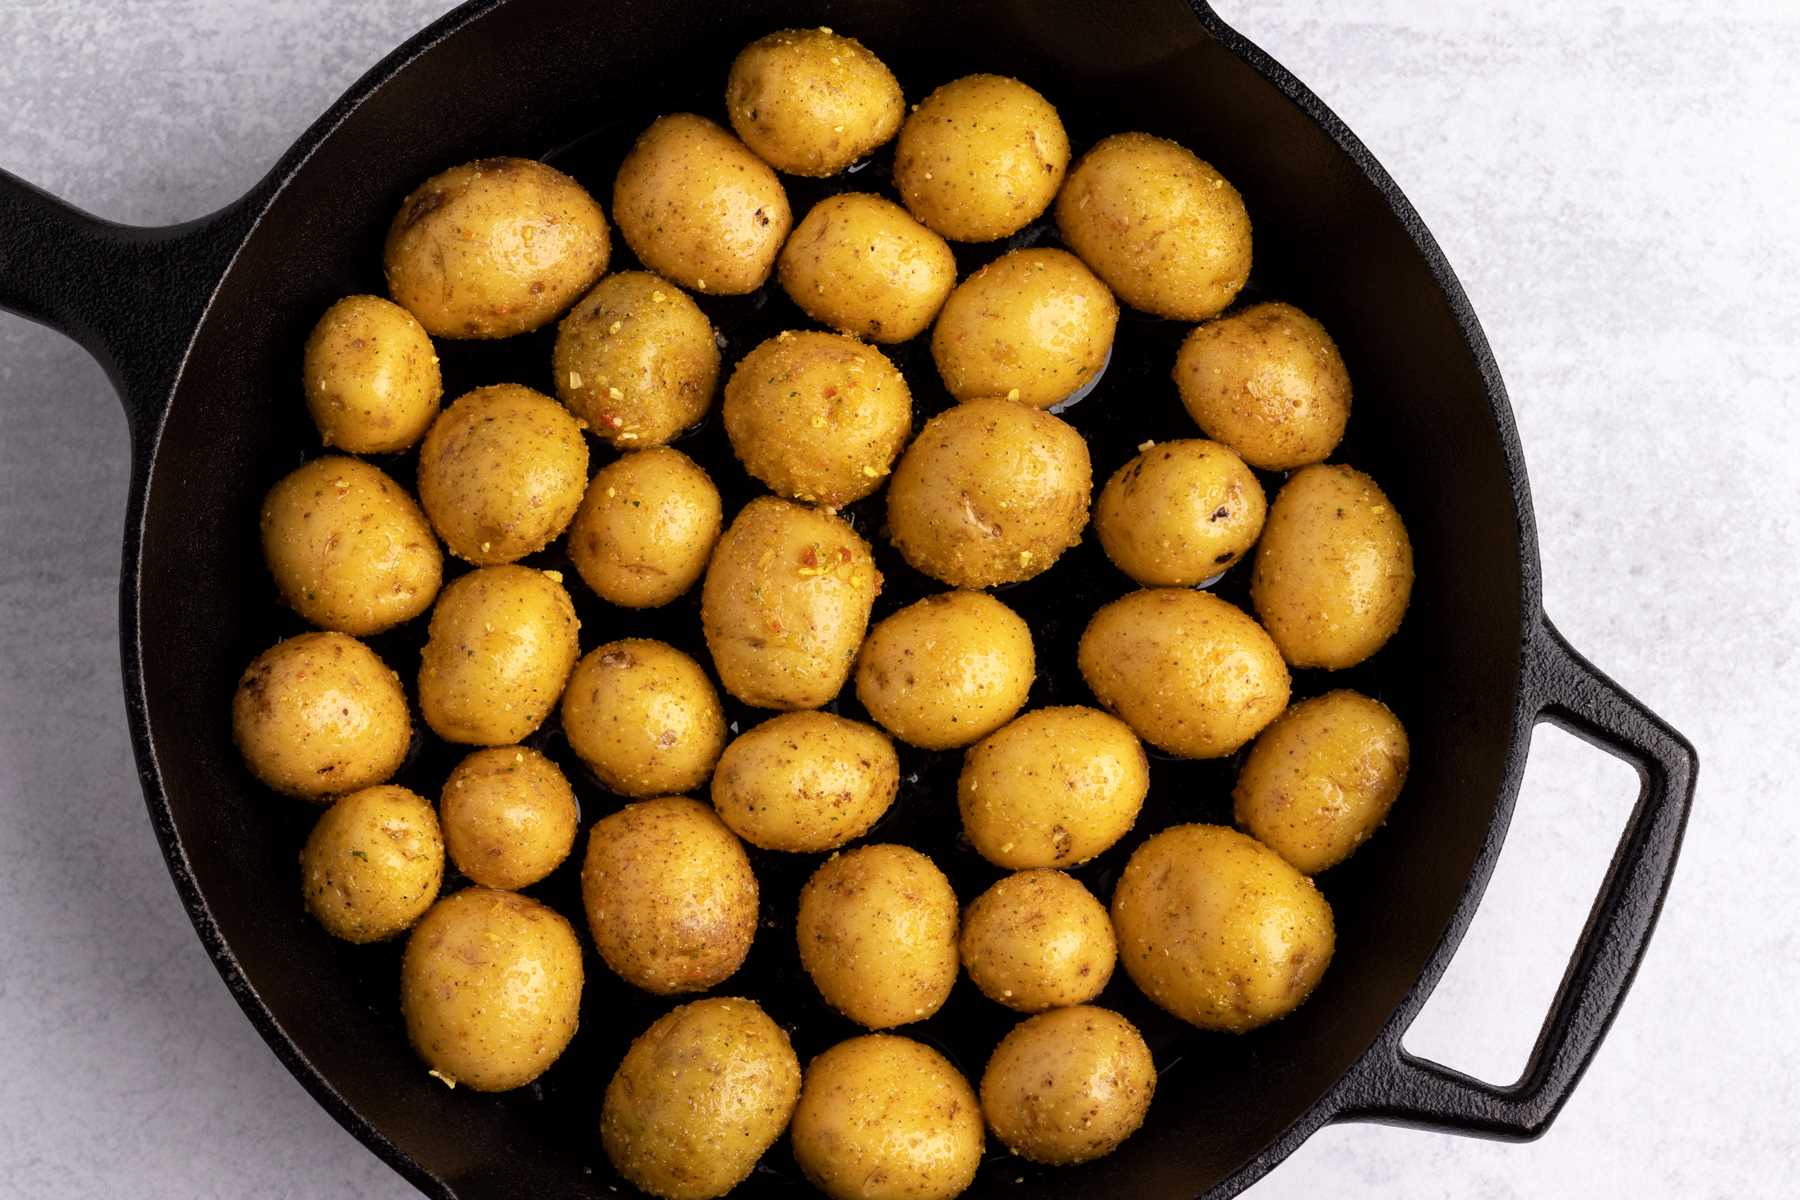 Oven roasted potatoes in a cast iron skillet.